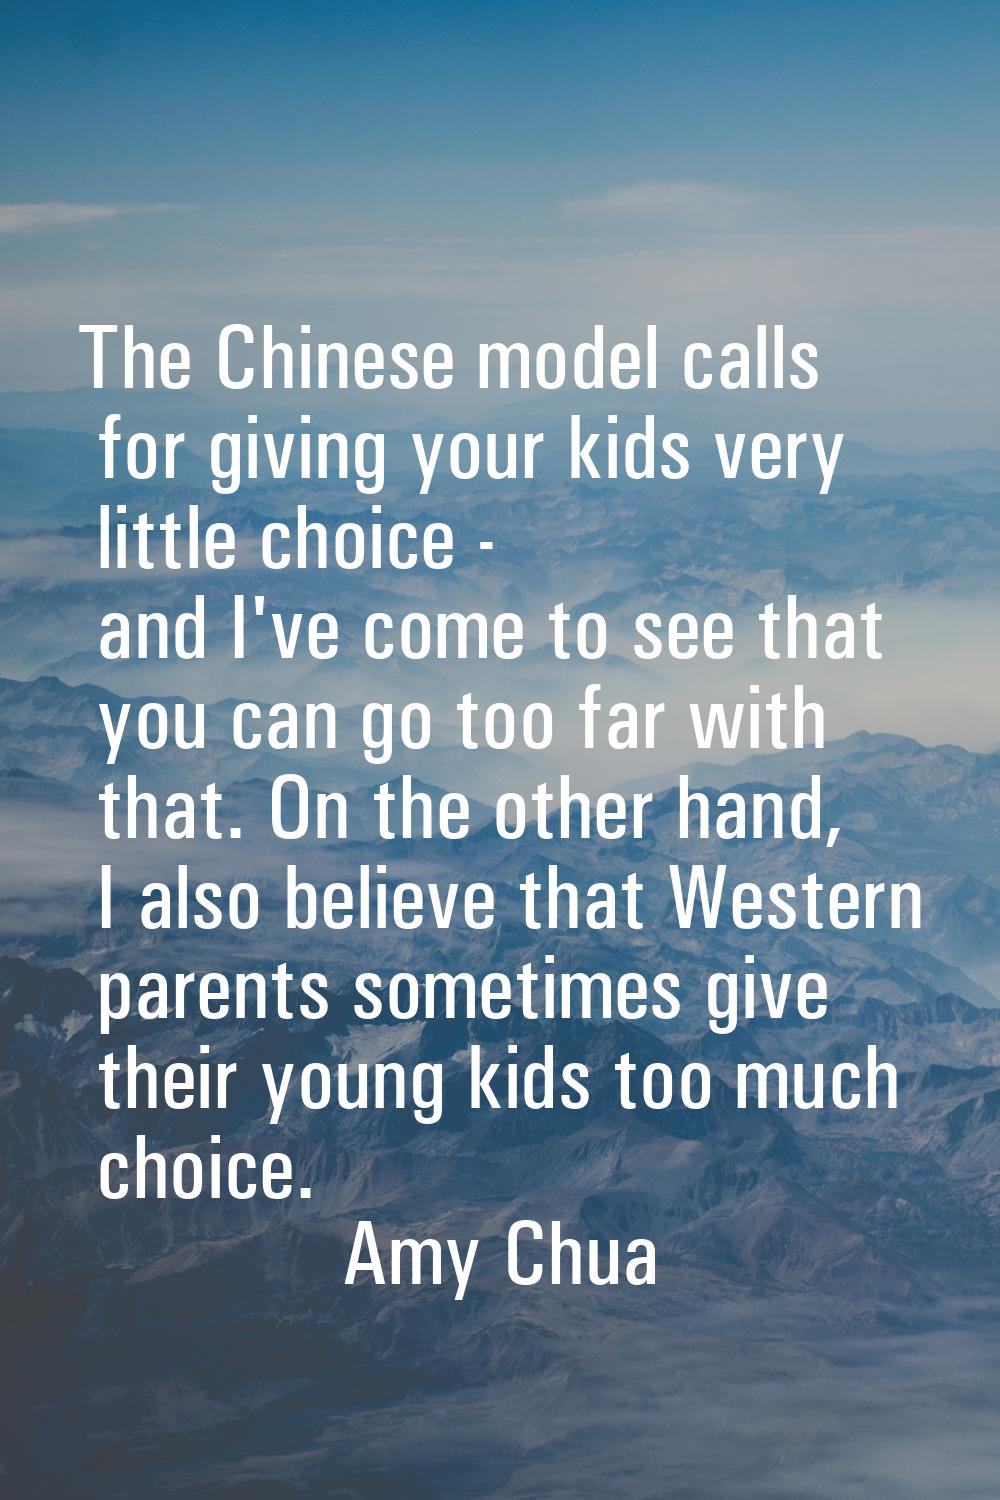 The Chinese model calls for giving your kids very little choice - and I've come to see that you can